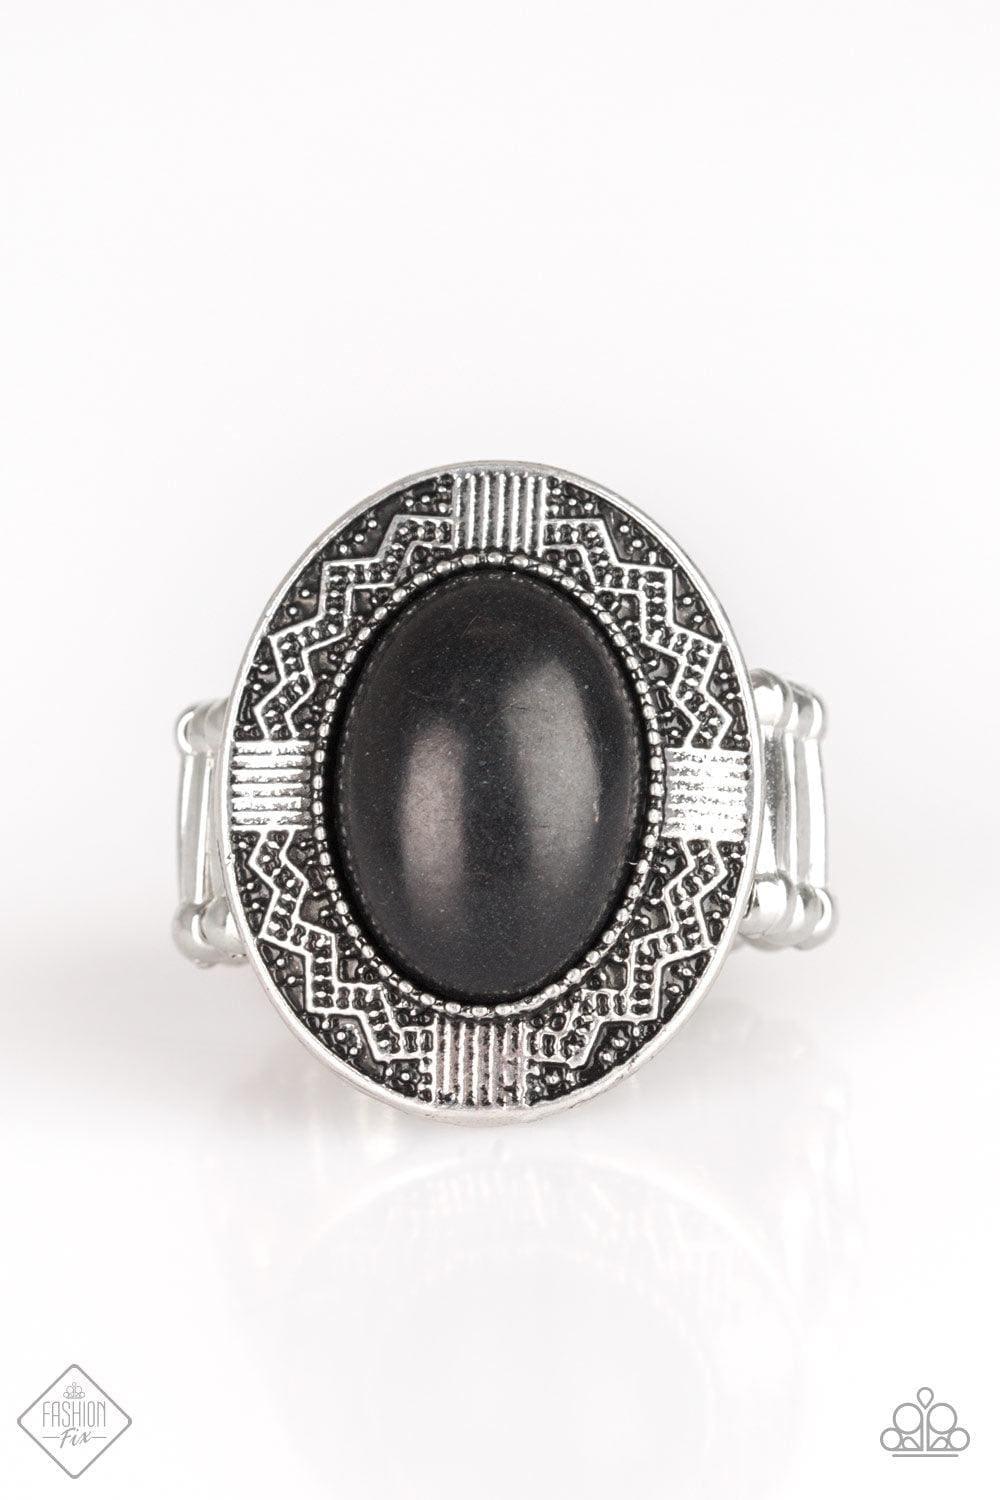 Paparazzi Accessories - Tribe Trend - Black Ring - Bling by JessieK